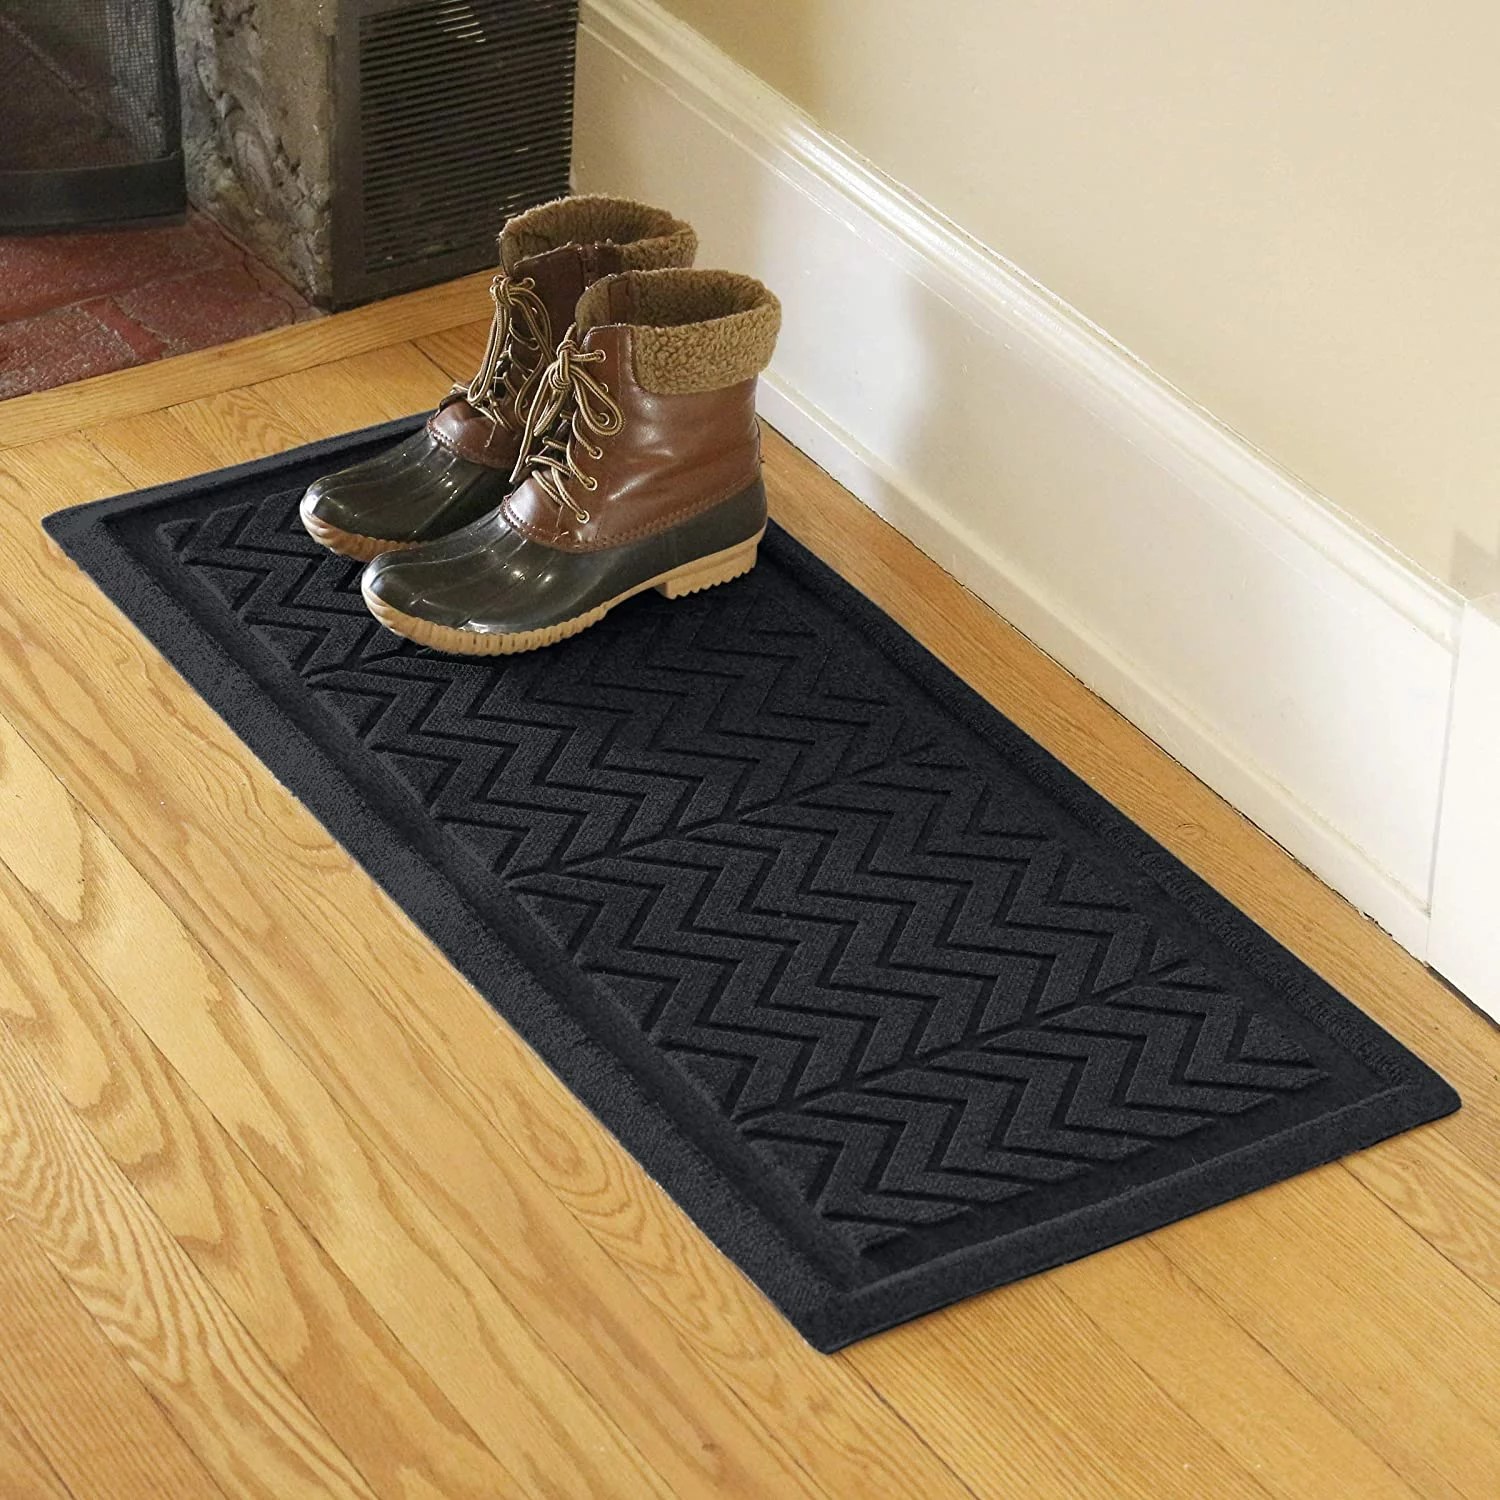 French Axis Rubber Boot Tray - Need this for winter